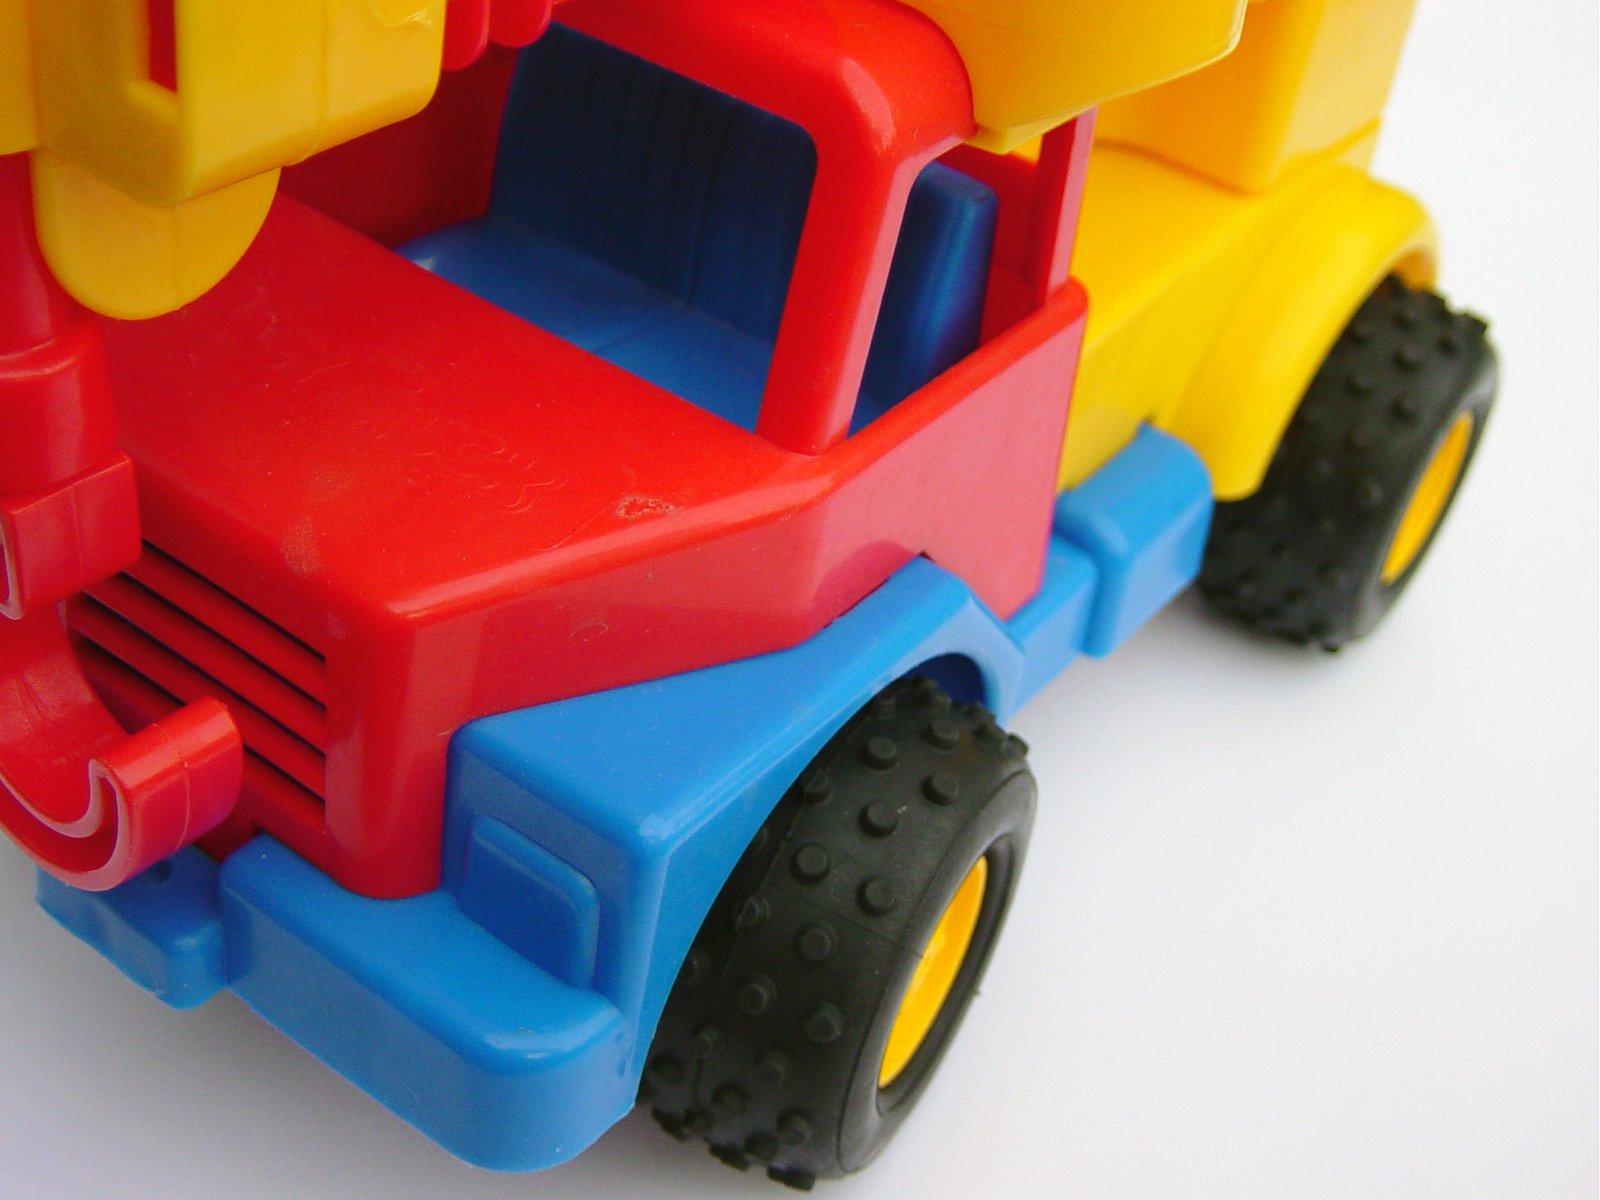 a close up of a truck made of plastic